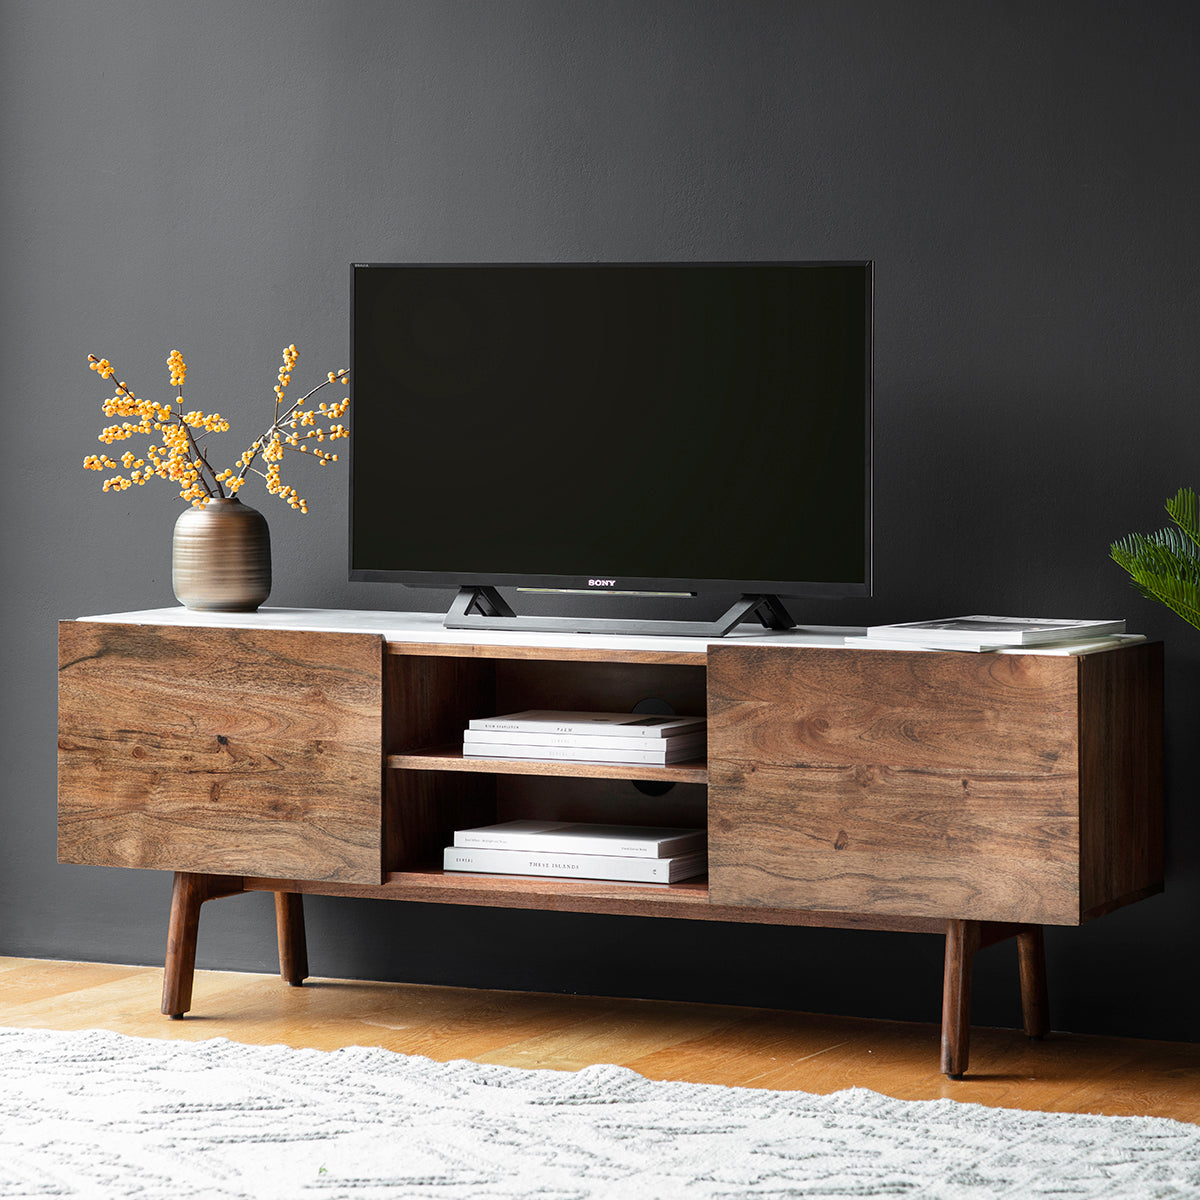 An Avonwick Media Cabinet 1360x380x500mm from Kikiathome.co.uk showcasing interior decor and home furniture with a tv on top.